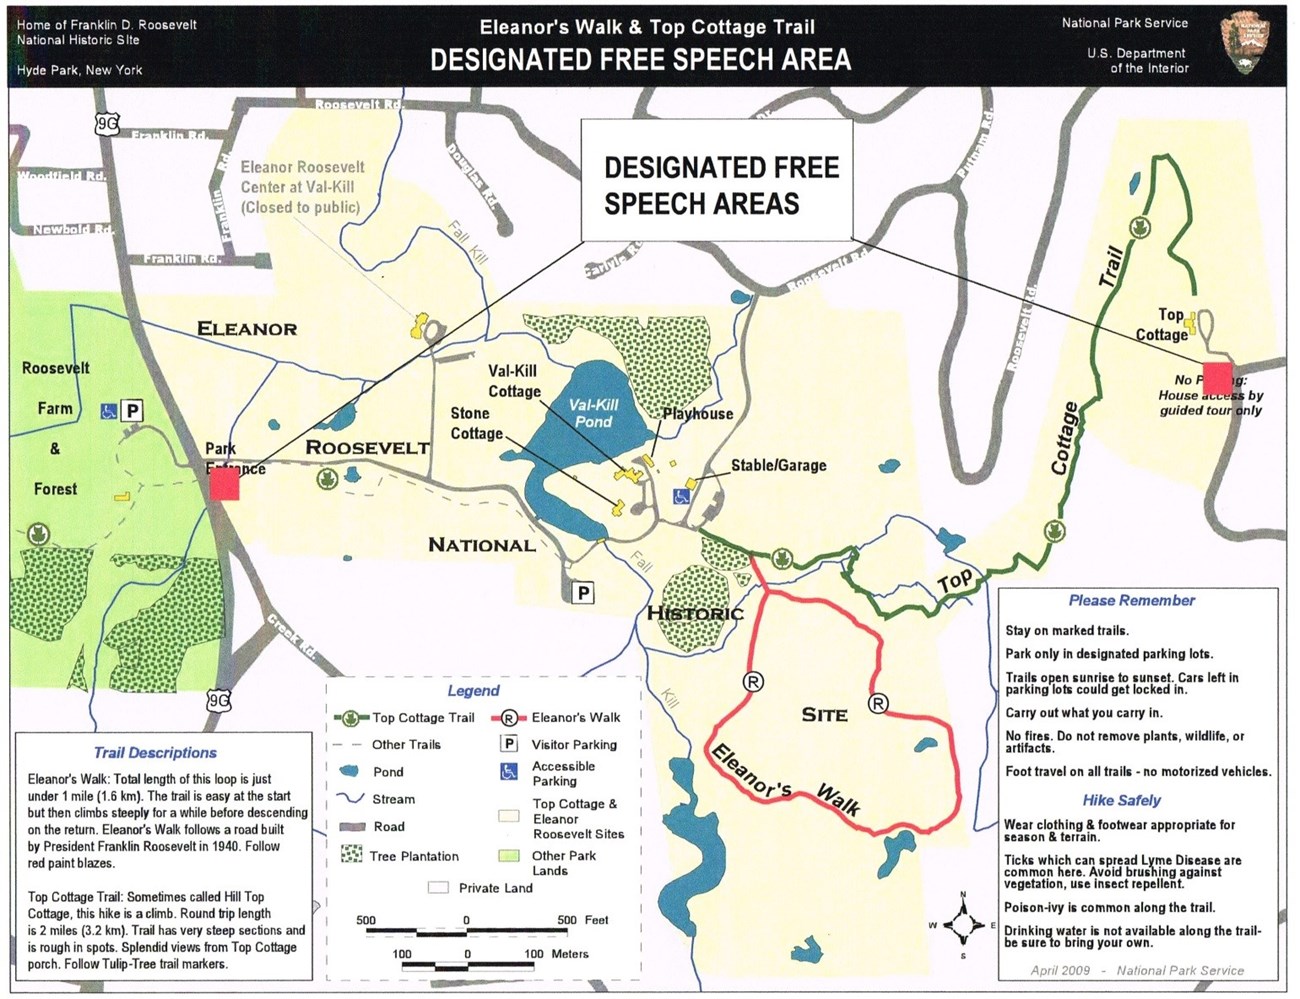 A map showing the free speech areas for Val-Kill and Top Cottage